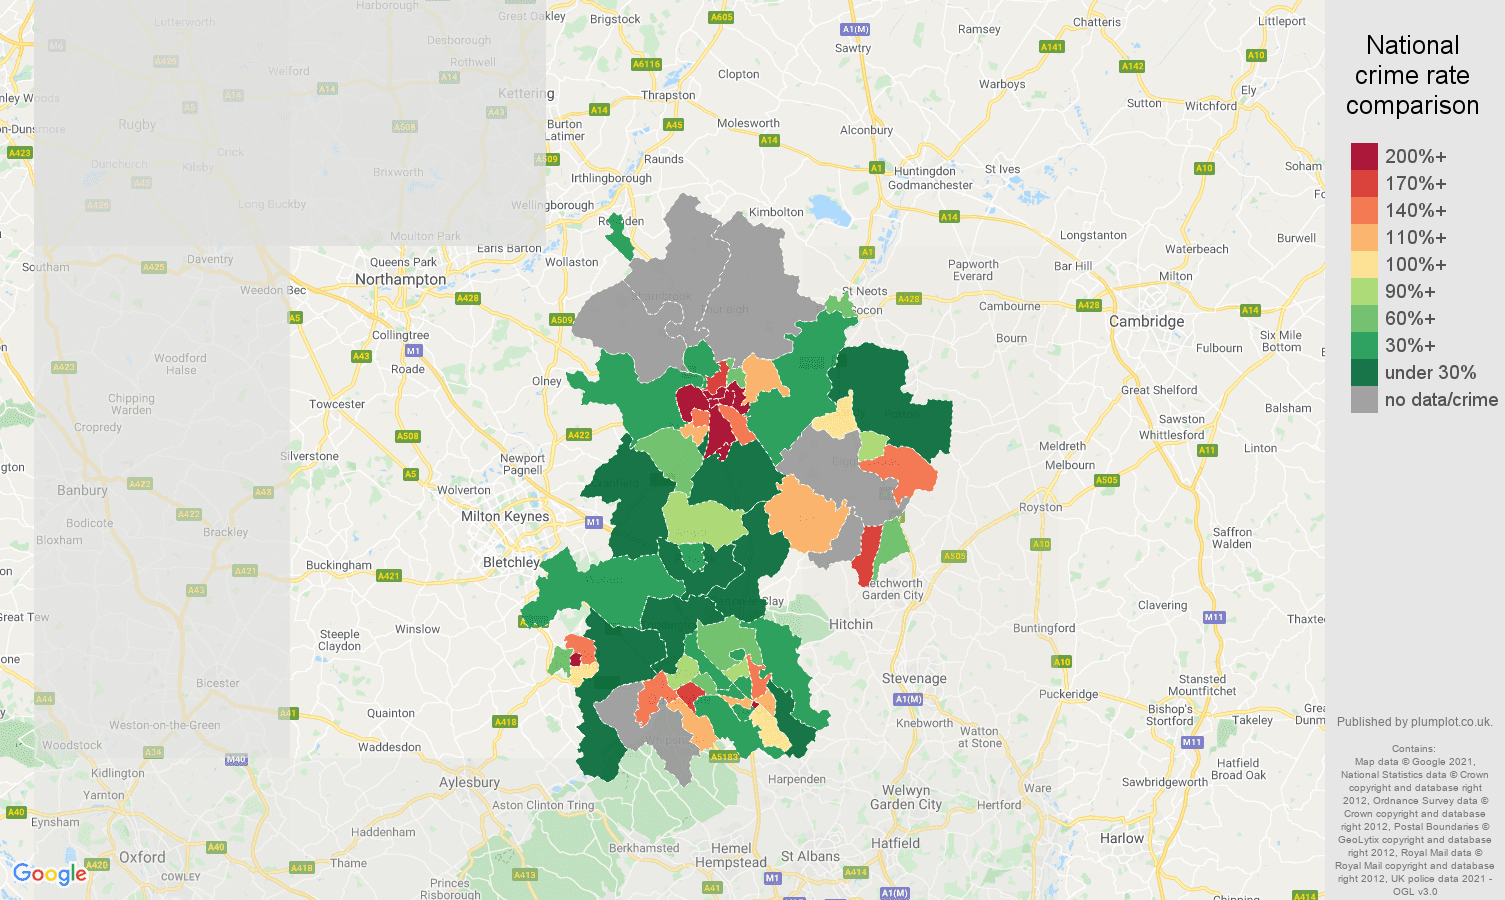 Bedfordshire bicycle theft crime rate comparison map